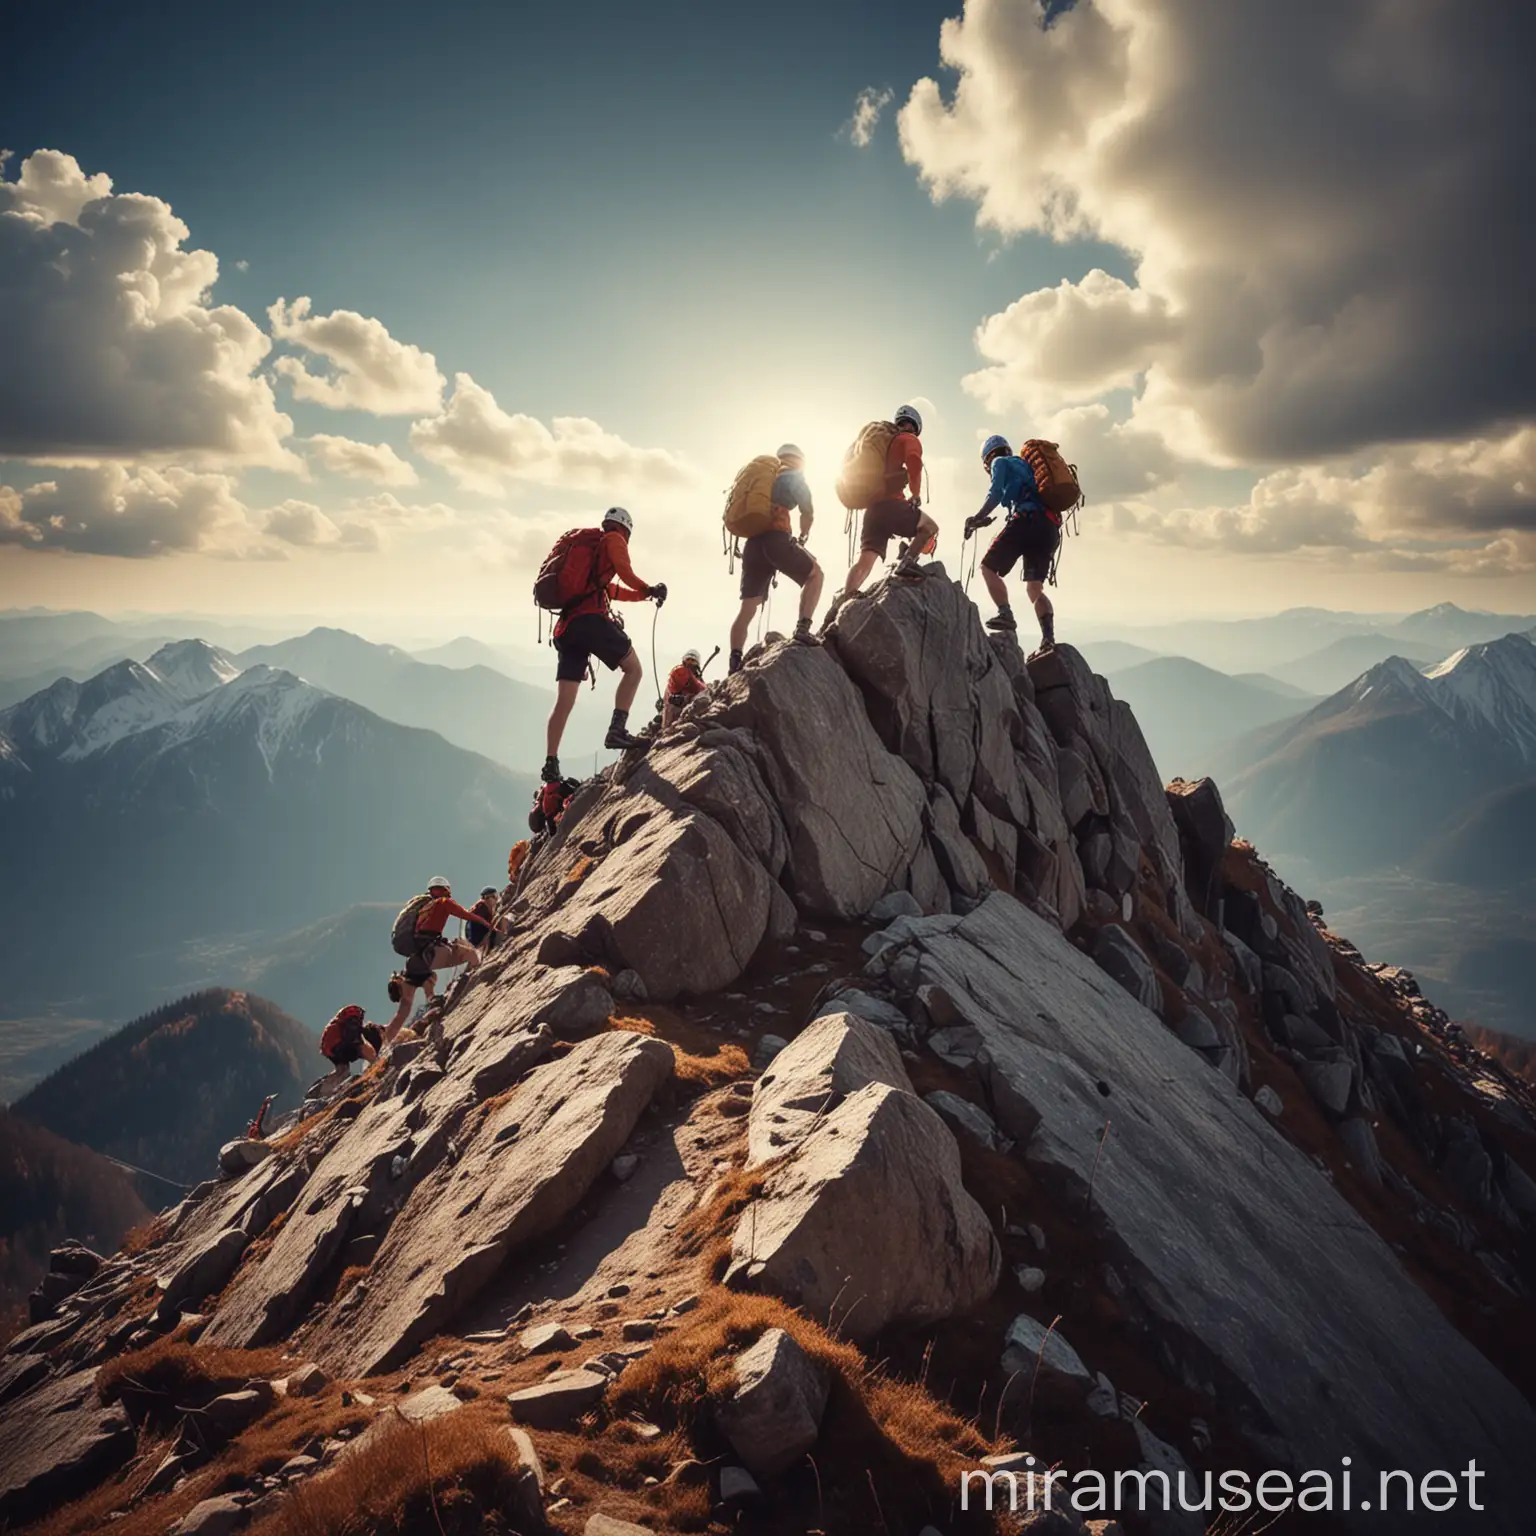 Team Climbing a Mountain to Kick Off a New Quarter with Tough Goals and Strong Motivation